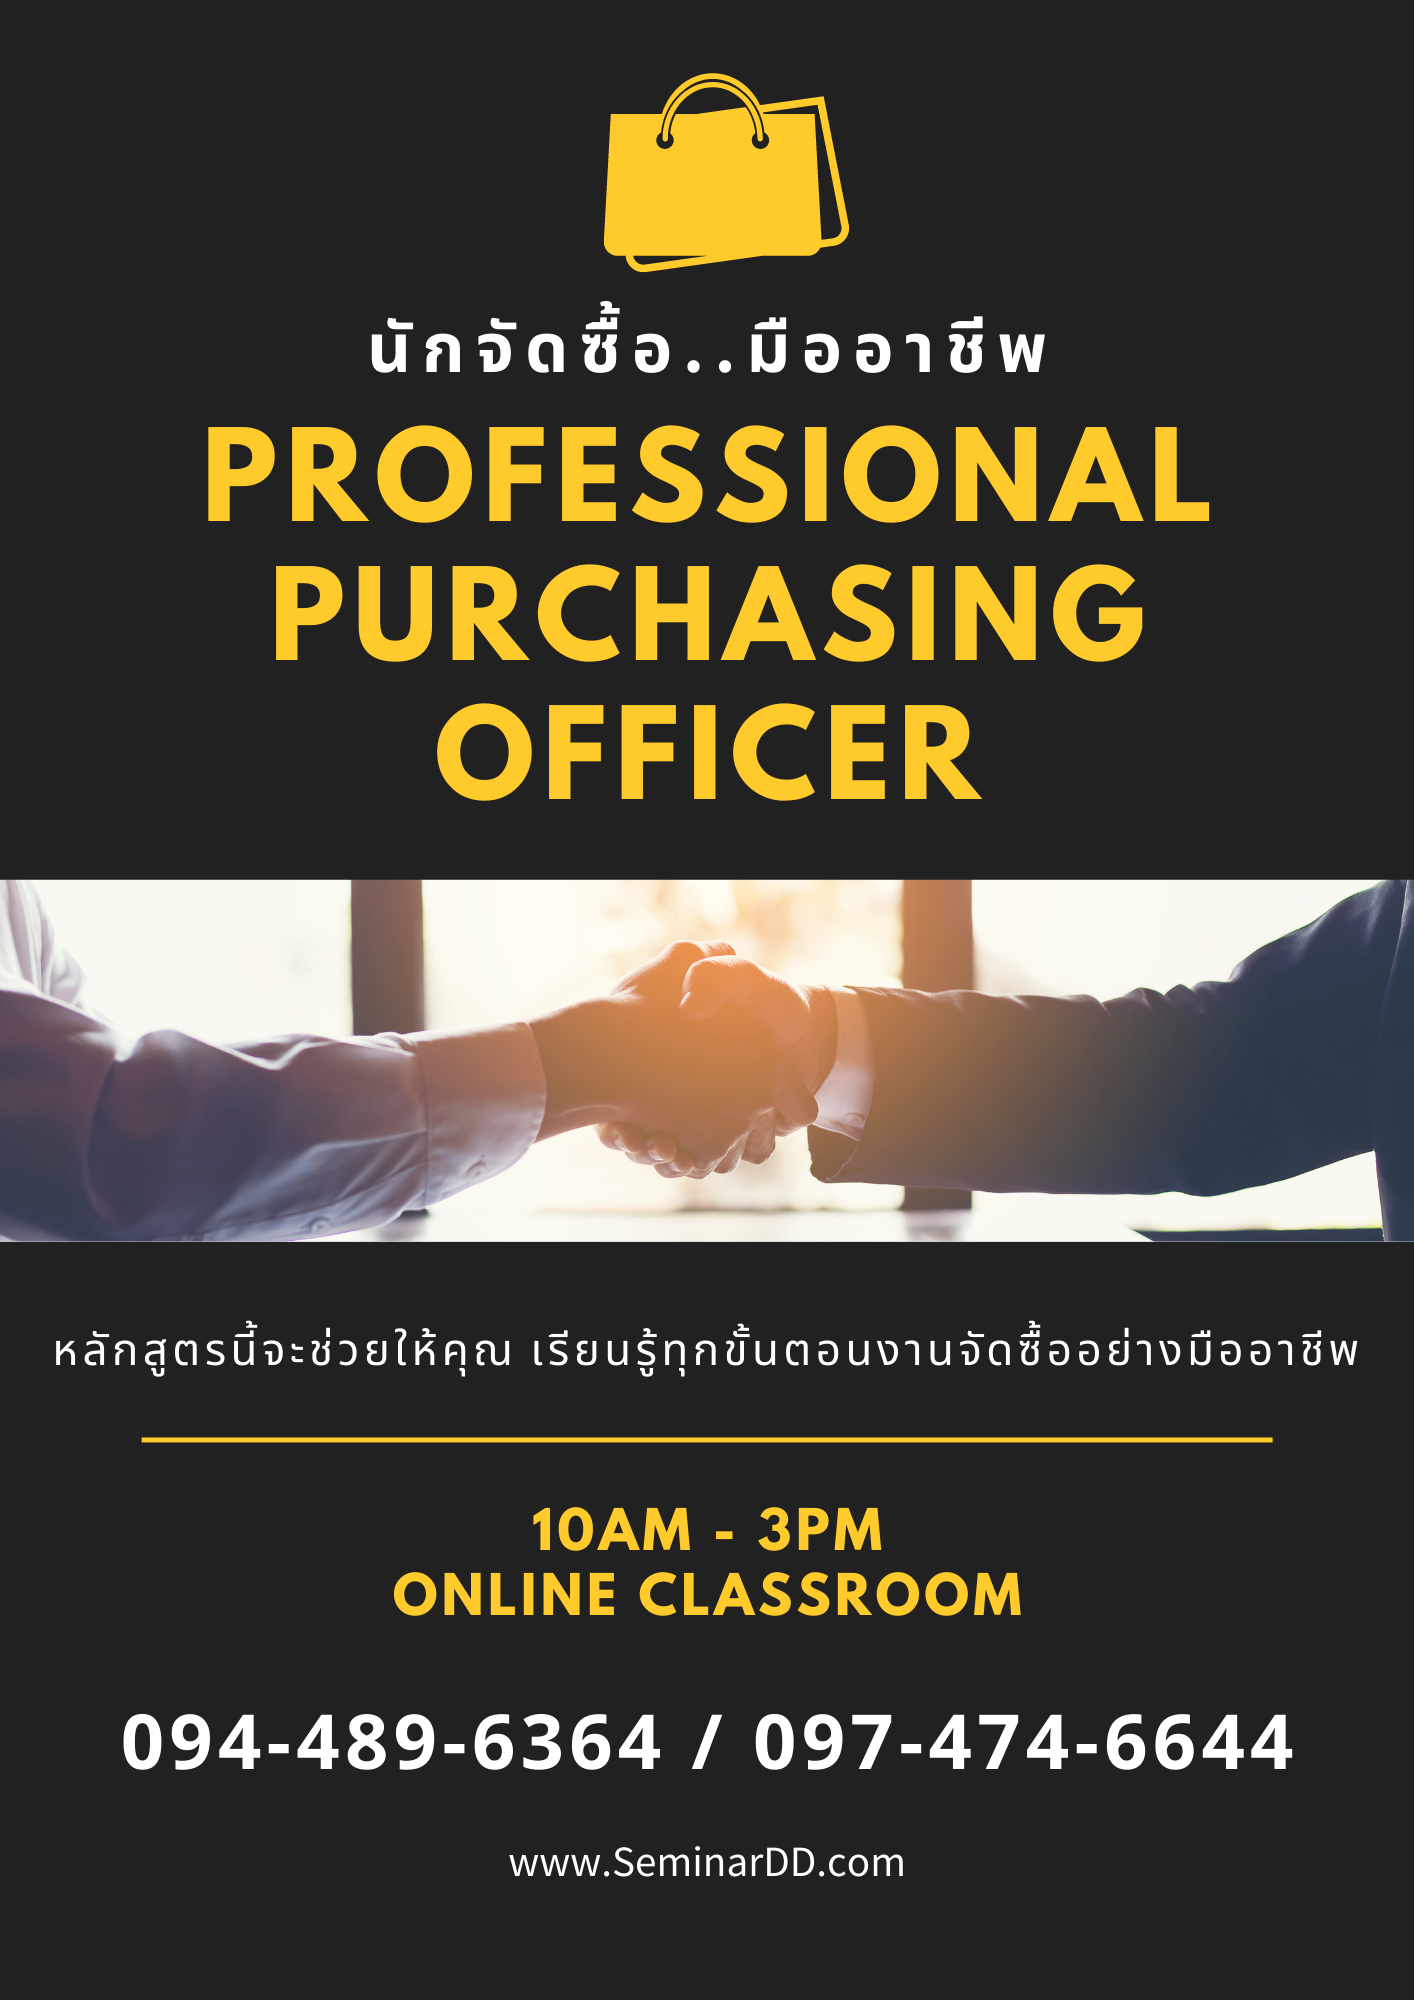 Online by Zoom หลักสูตร หลักสูตร นักจัดซื้อ..มืออาชีพ (Professional Purchasing Officer)